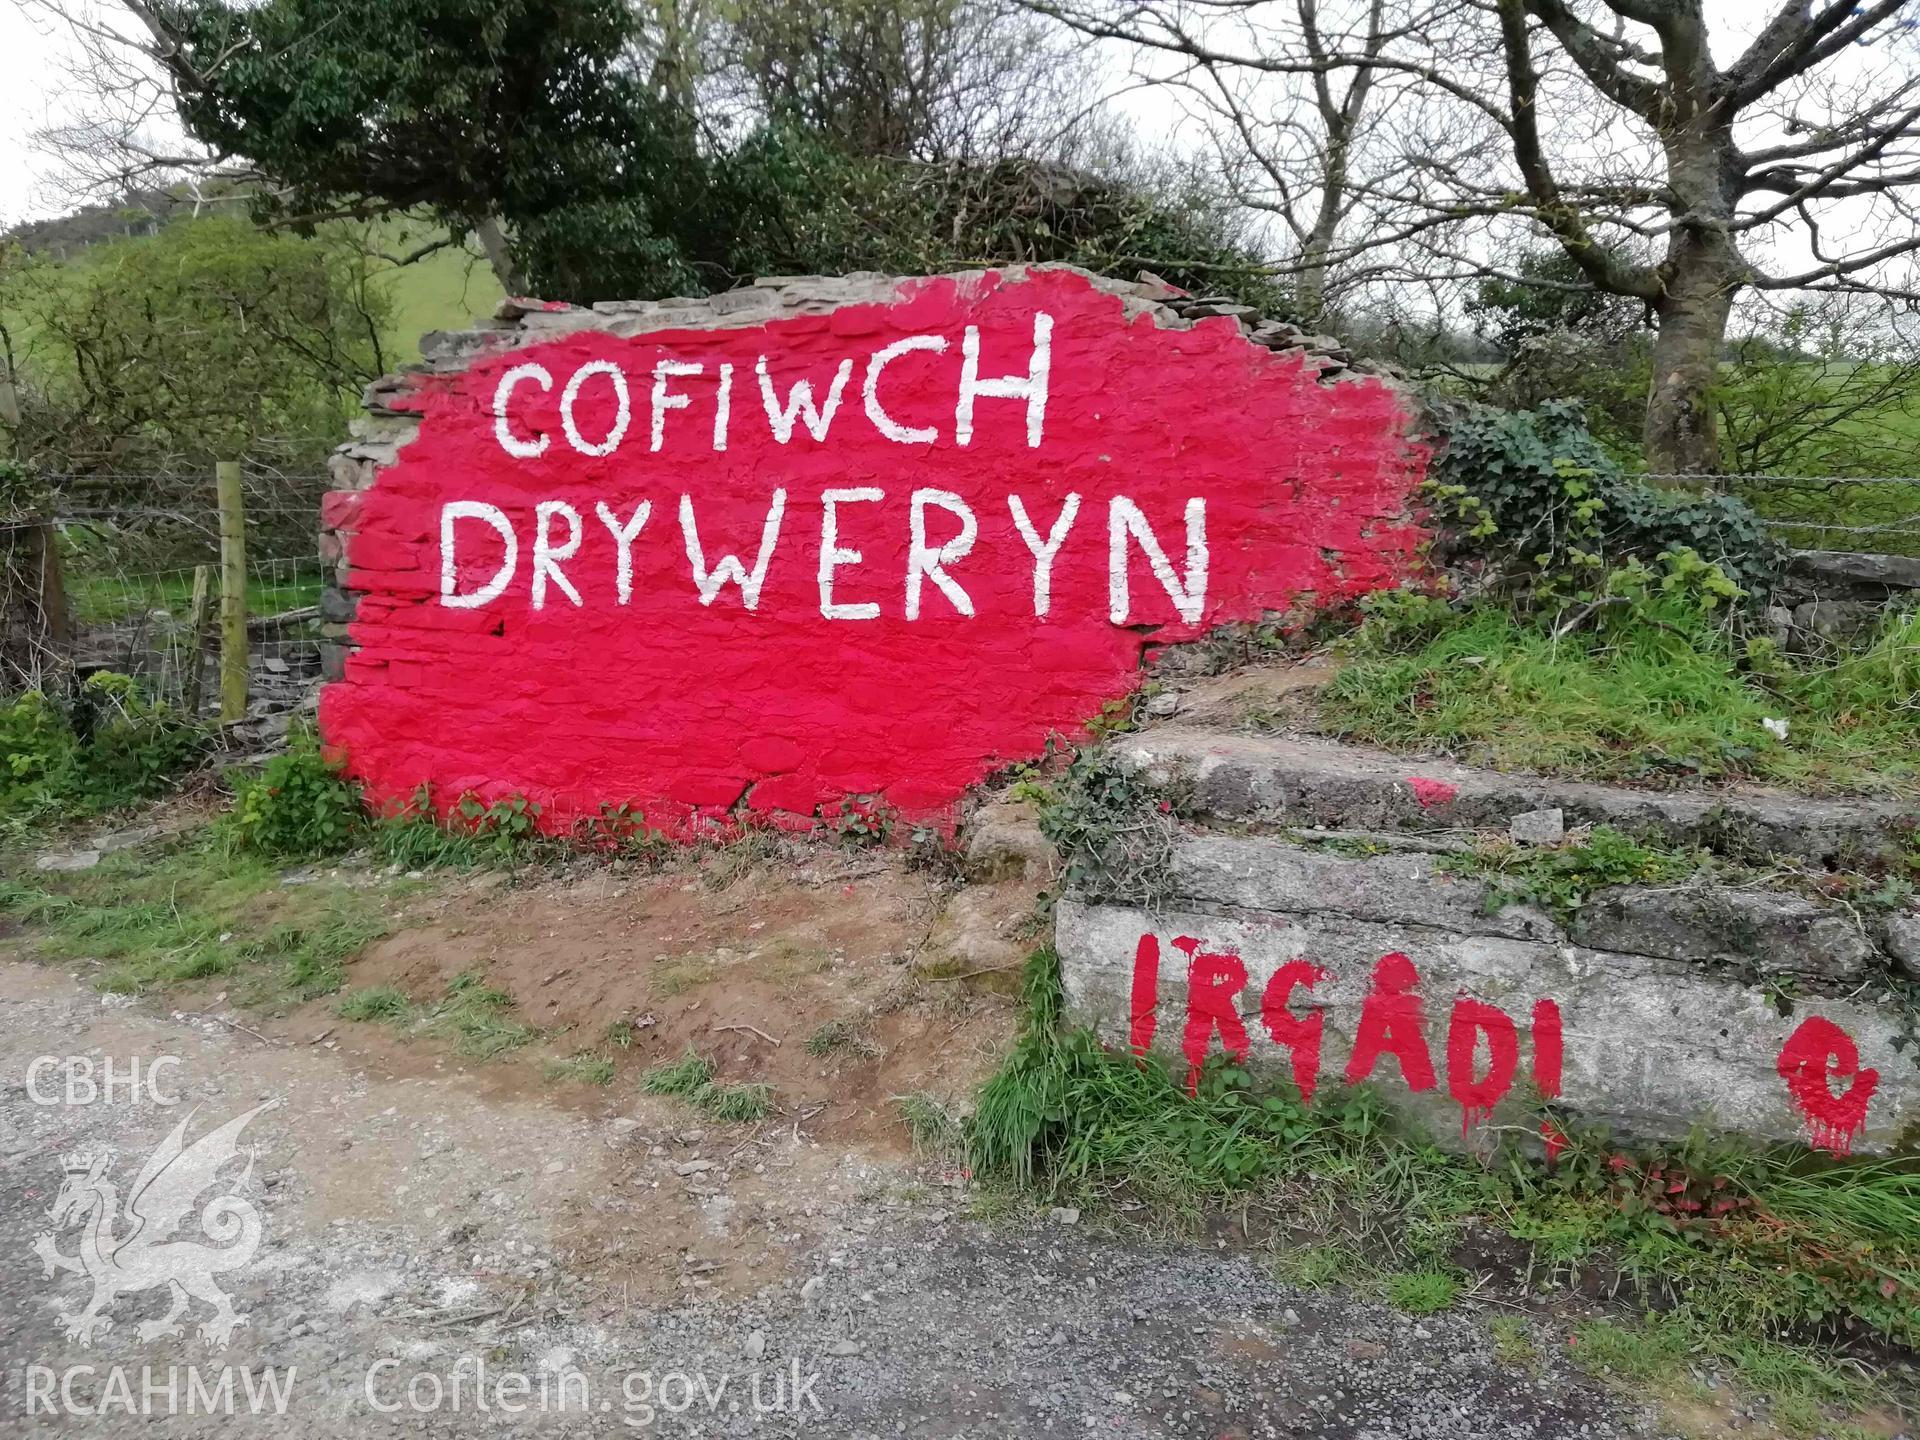 Digital colour photograph showing Cofiwch Dryweryn Wall, following repairs and repainting. Taken 15 April 2019.